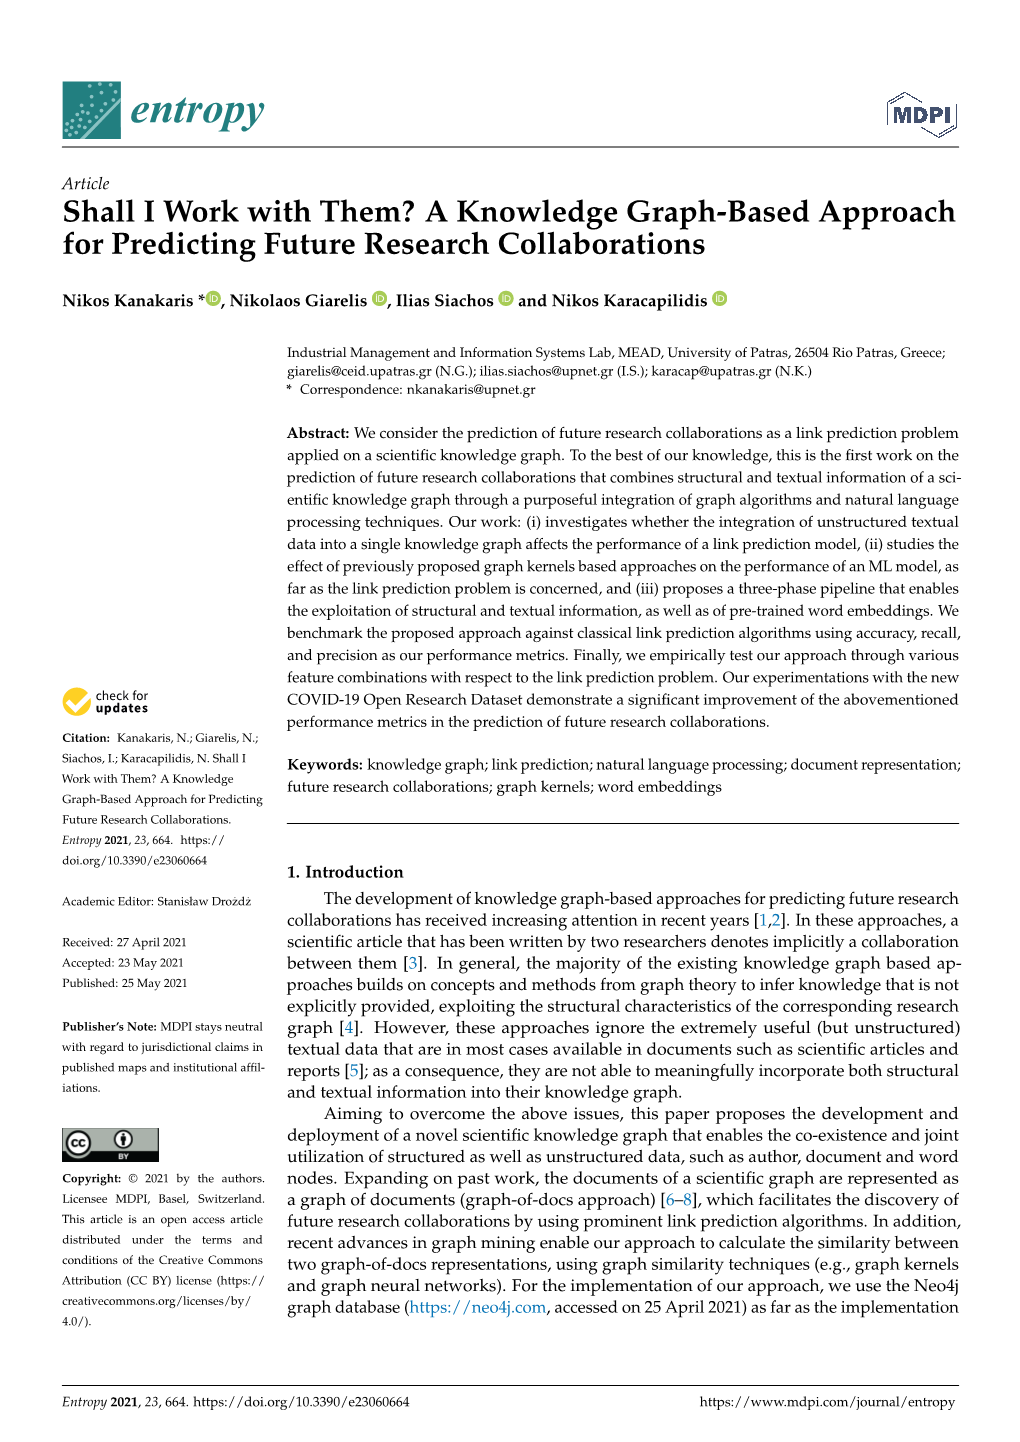 A Knowledge Graph-Based Approach for Predicting Future Research Collaborations